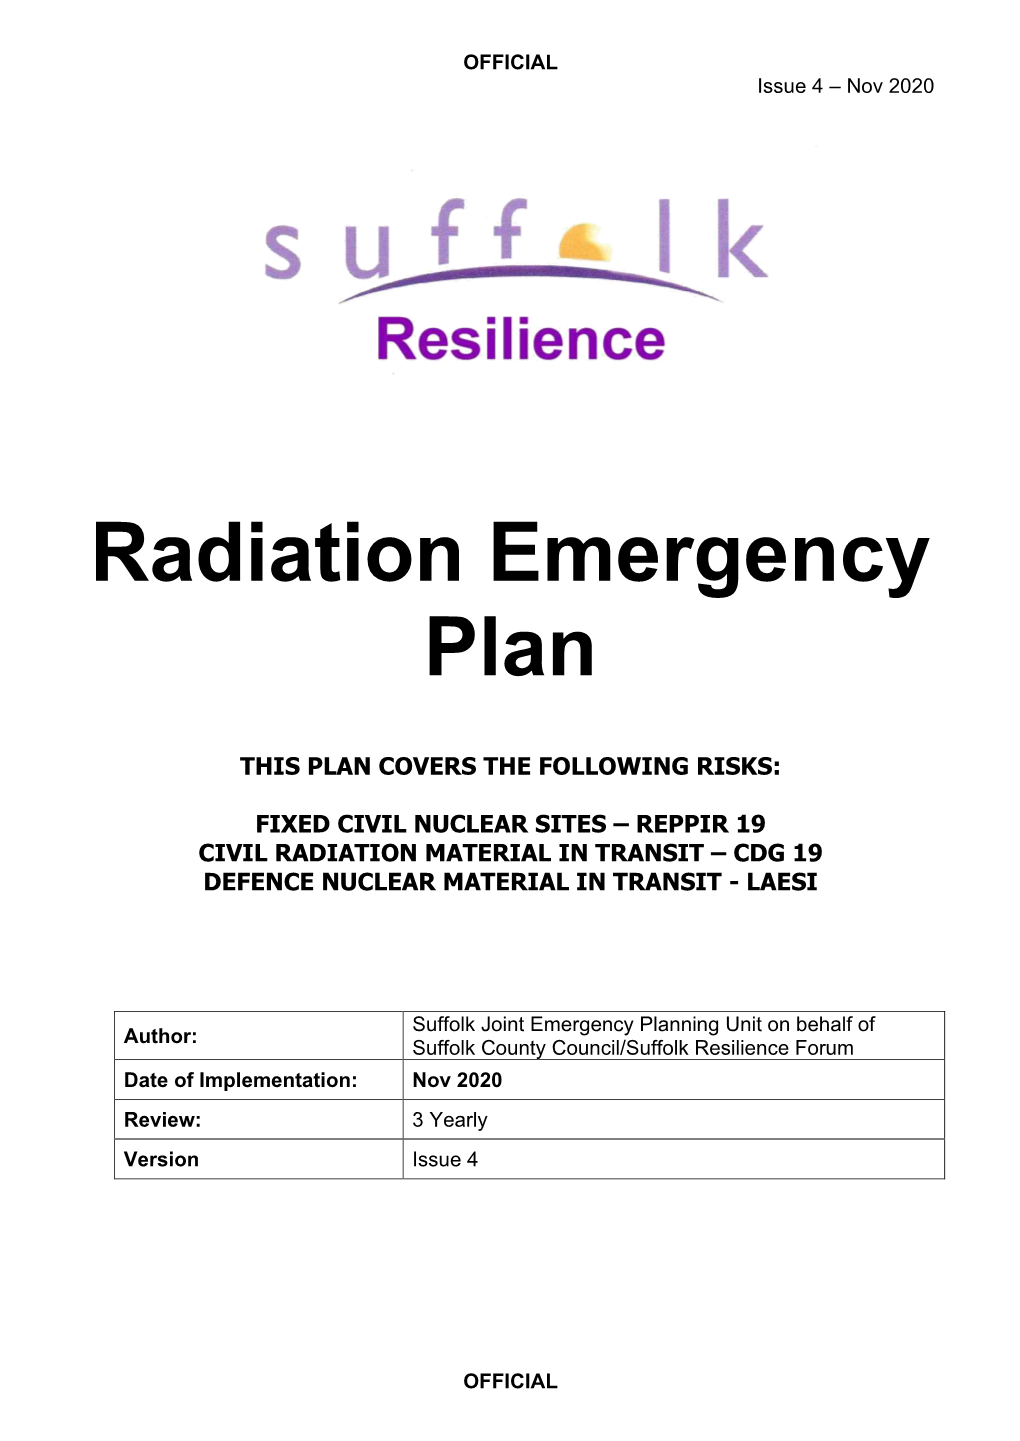 SRF Radiation Emergency Plan Iii INTRO OFFICIAL OFFICIAL Issue 4 – Nov 2020